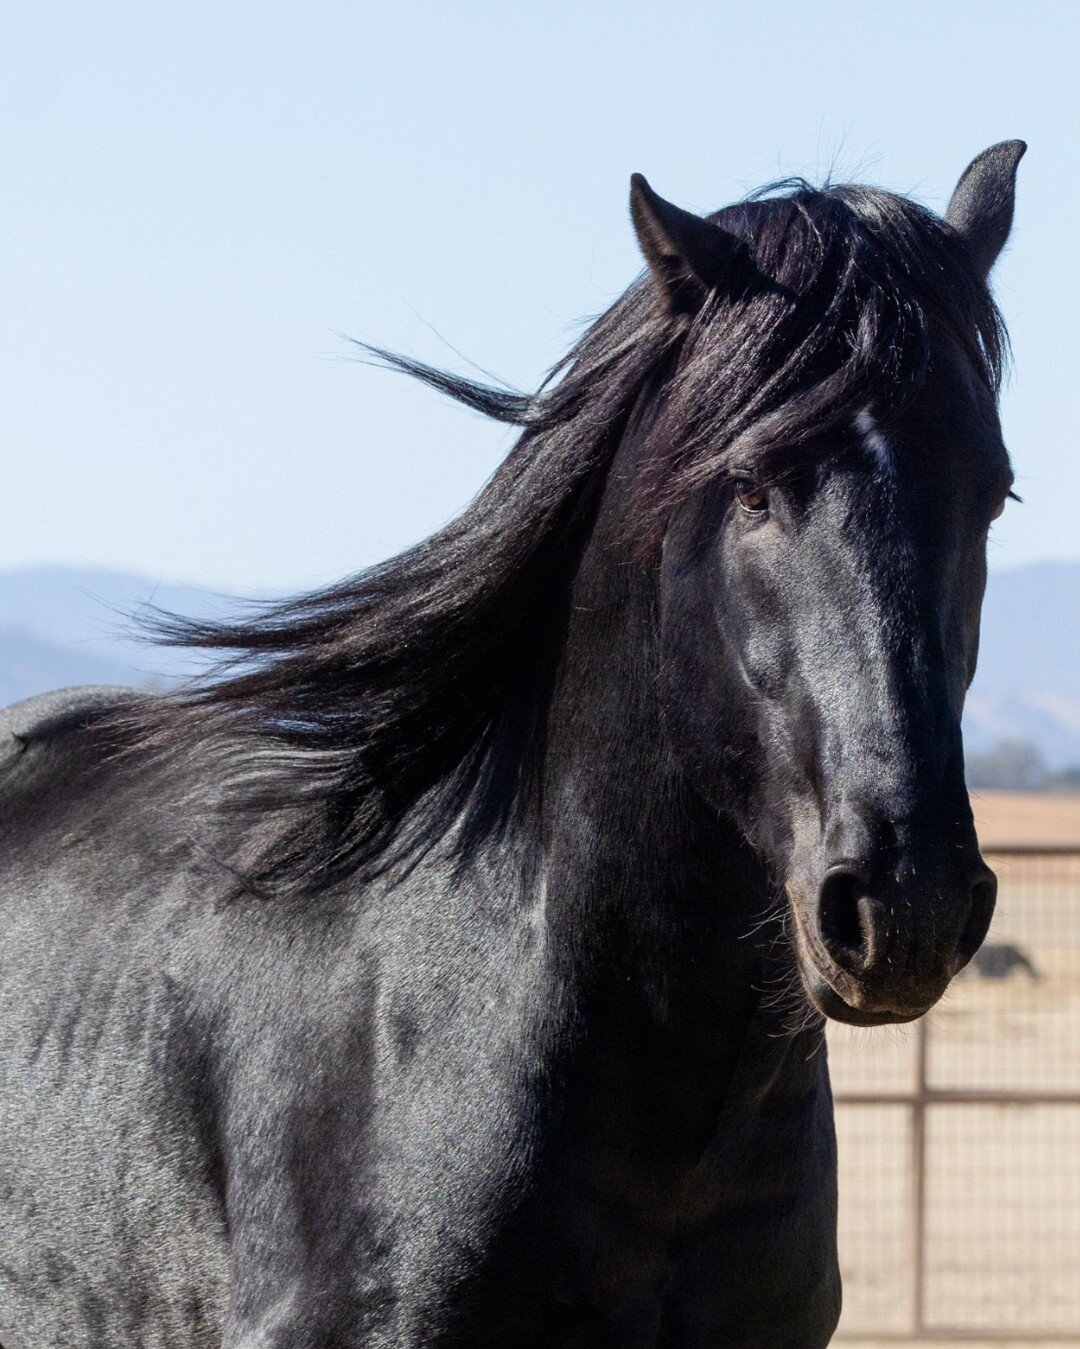 Making Pegasus Stallion &quot;Caesar&quot; (1/2 Friesian 1/2 Shire), Sired by Julius 486 is standing at stud this season and is available for fresh and frozen semen. He is currently 17.2 Hands at 4 years old. &ldquo;Caeser&rdquo; has long legs, solid